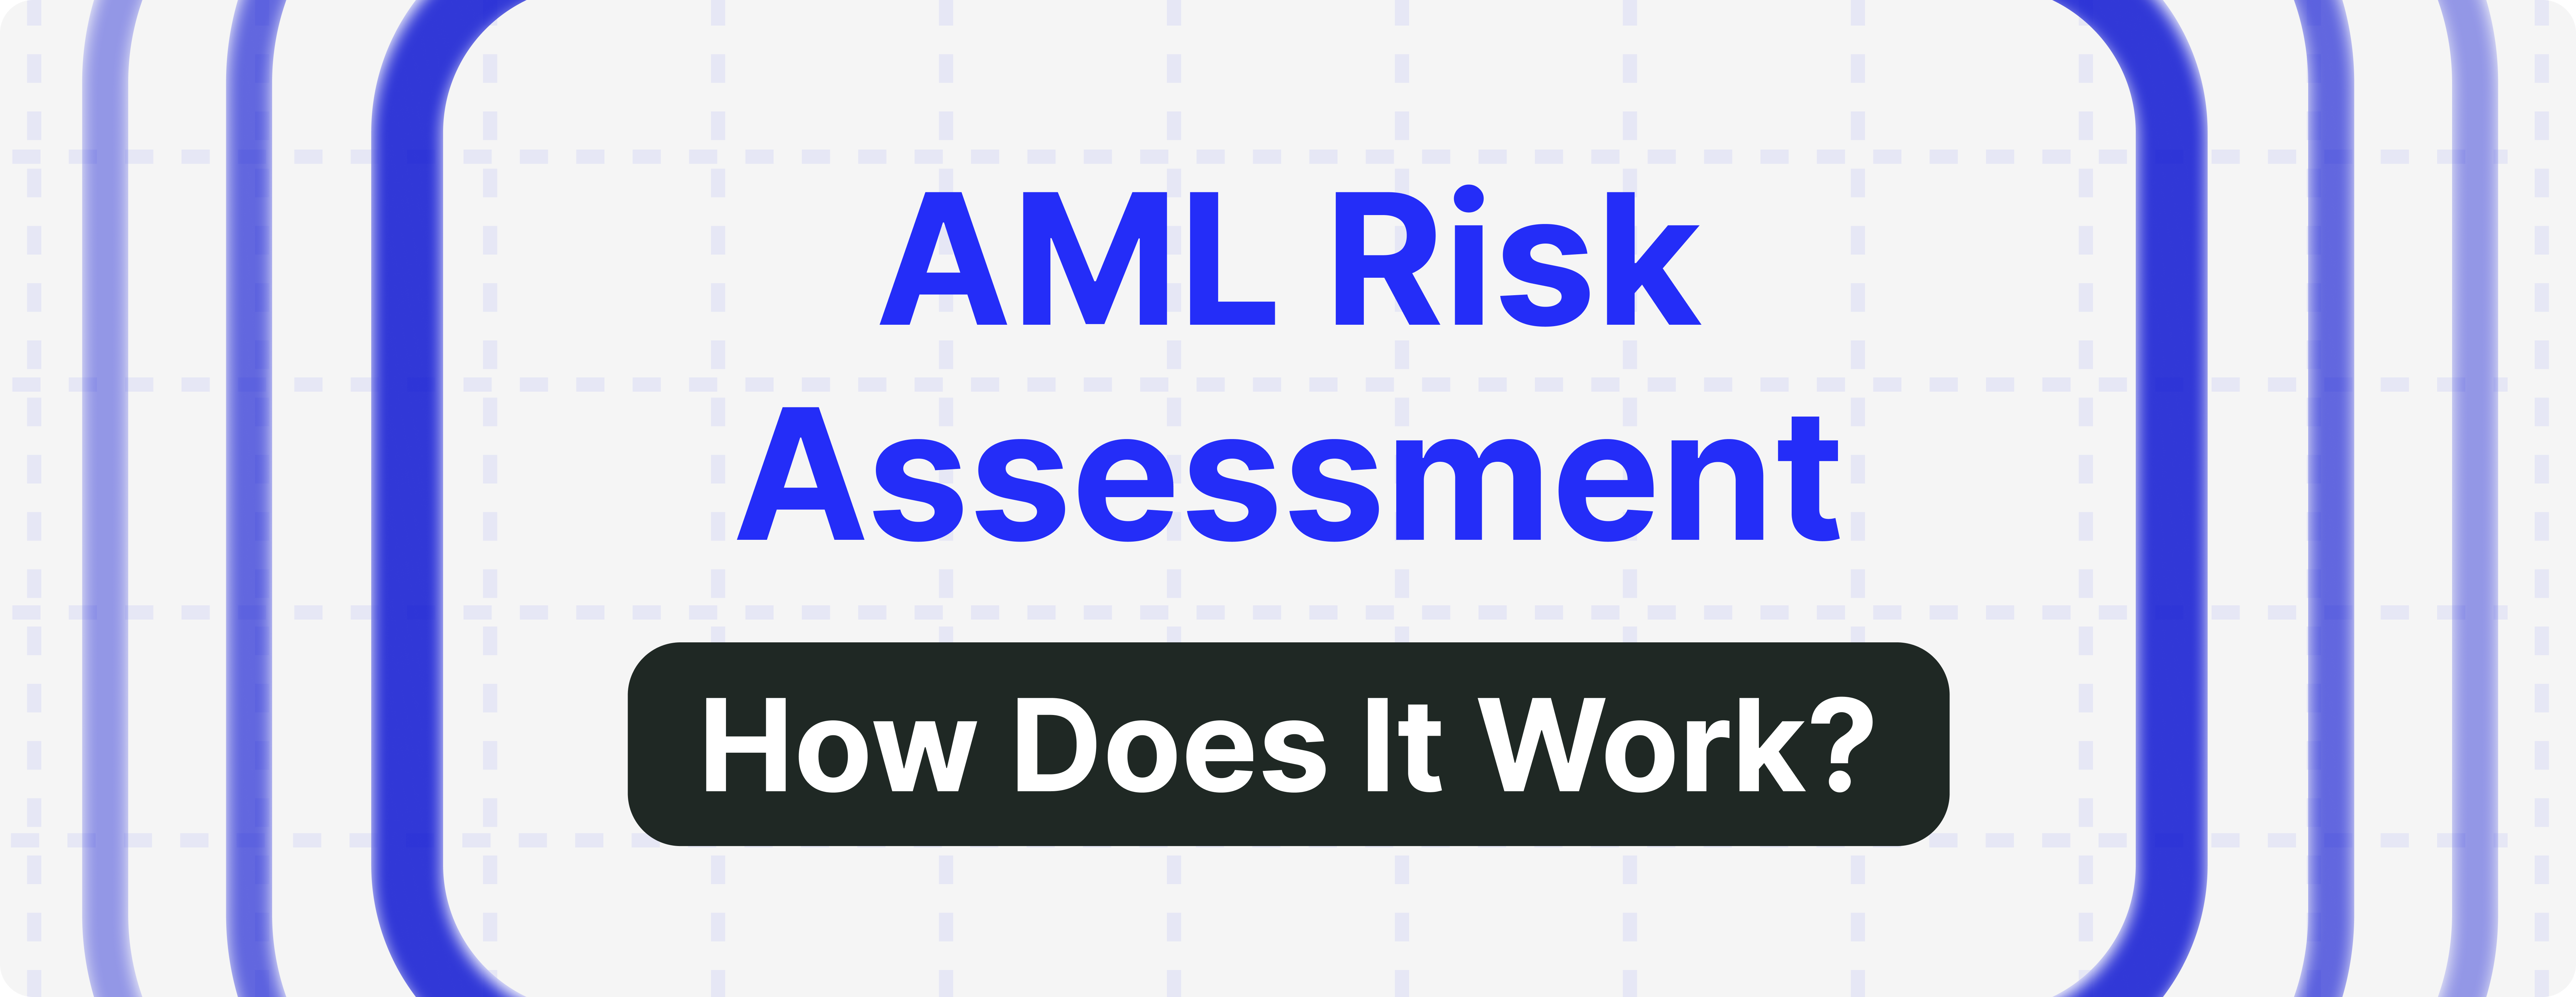 What Is AML Risk Assessment?